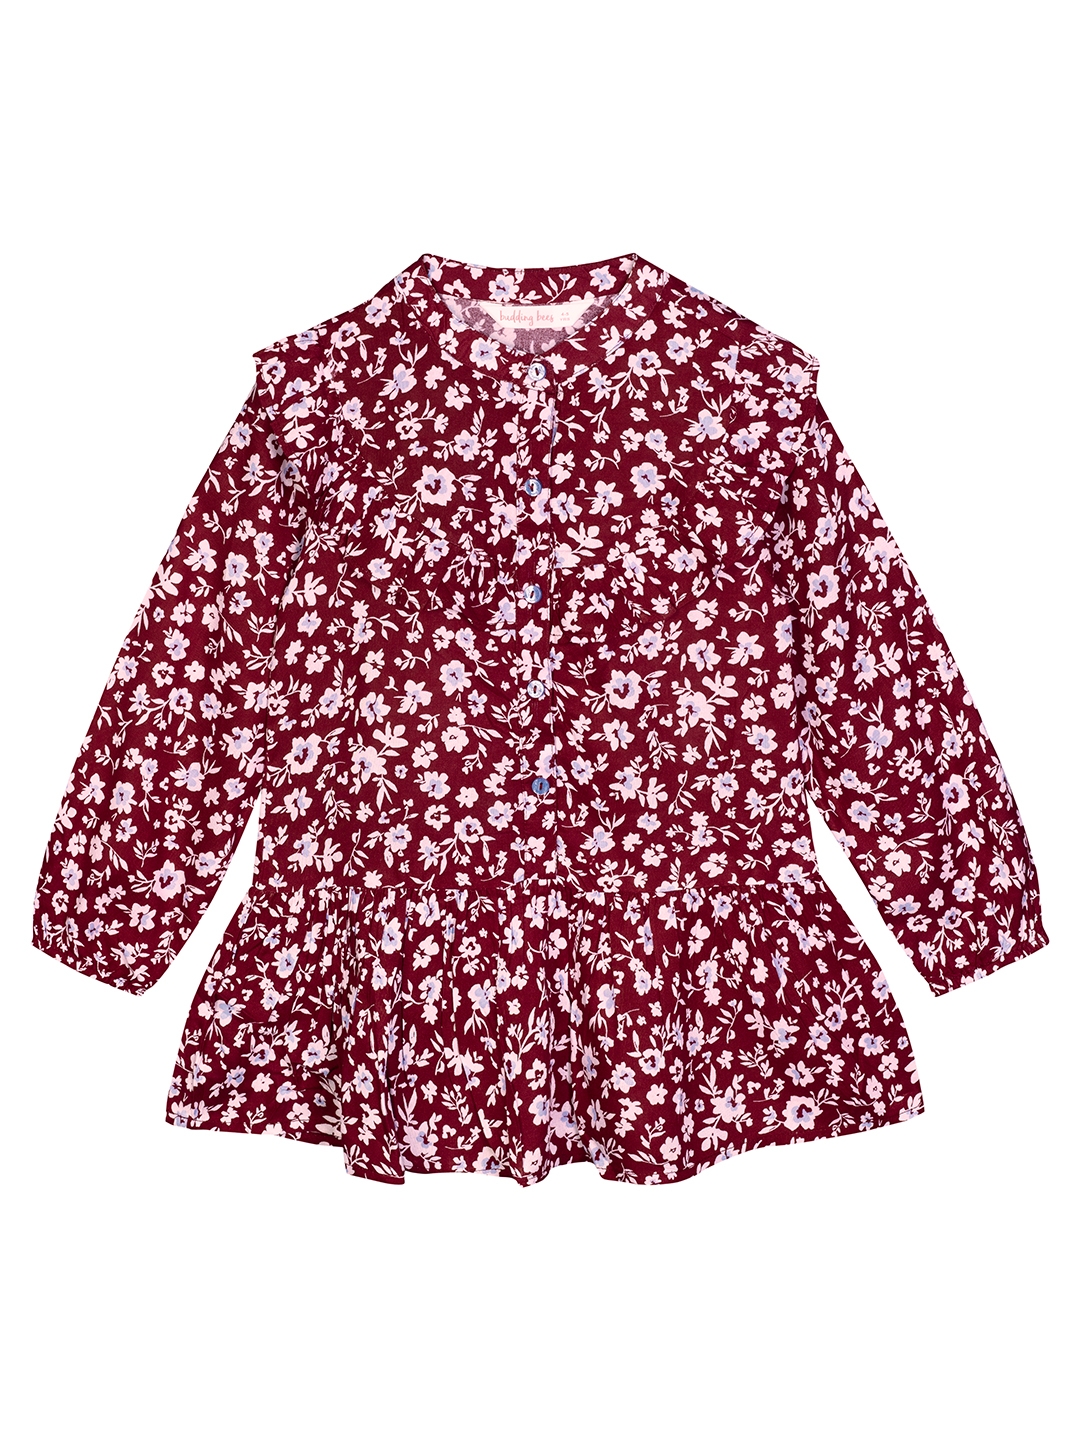 Budding Bees | Red Floral Top